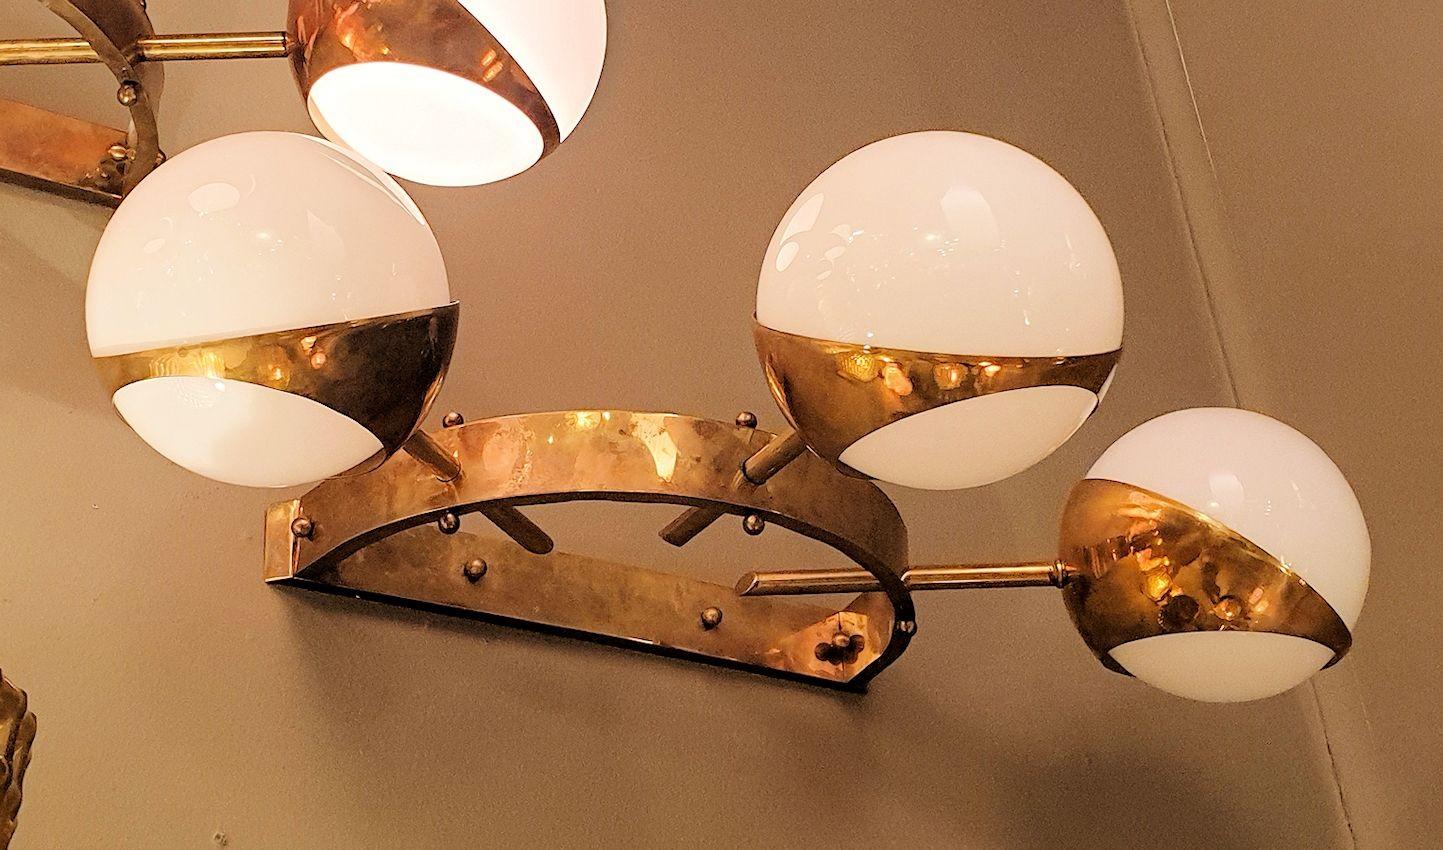 Mid-Century Modern large wall sconces, attributed to Stilnovo, Italy, 1960s.
The pair of large sconces is made of white translucent glass globes and cast brass mounts.
The vintage sconces have 3 lights each, nested inside the three glass